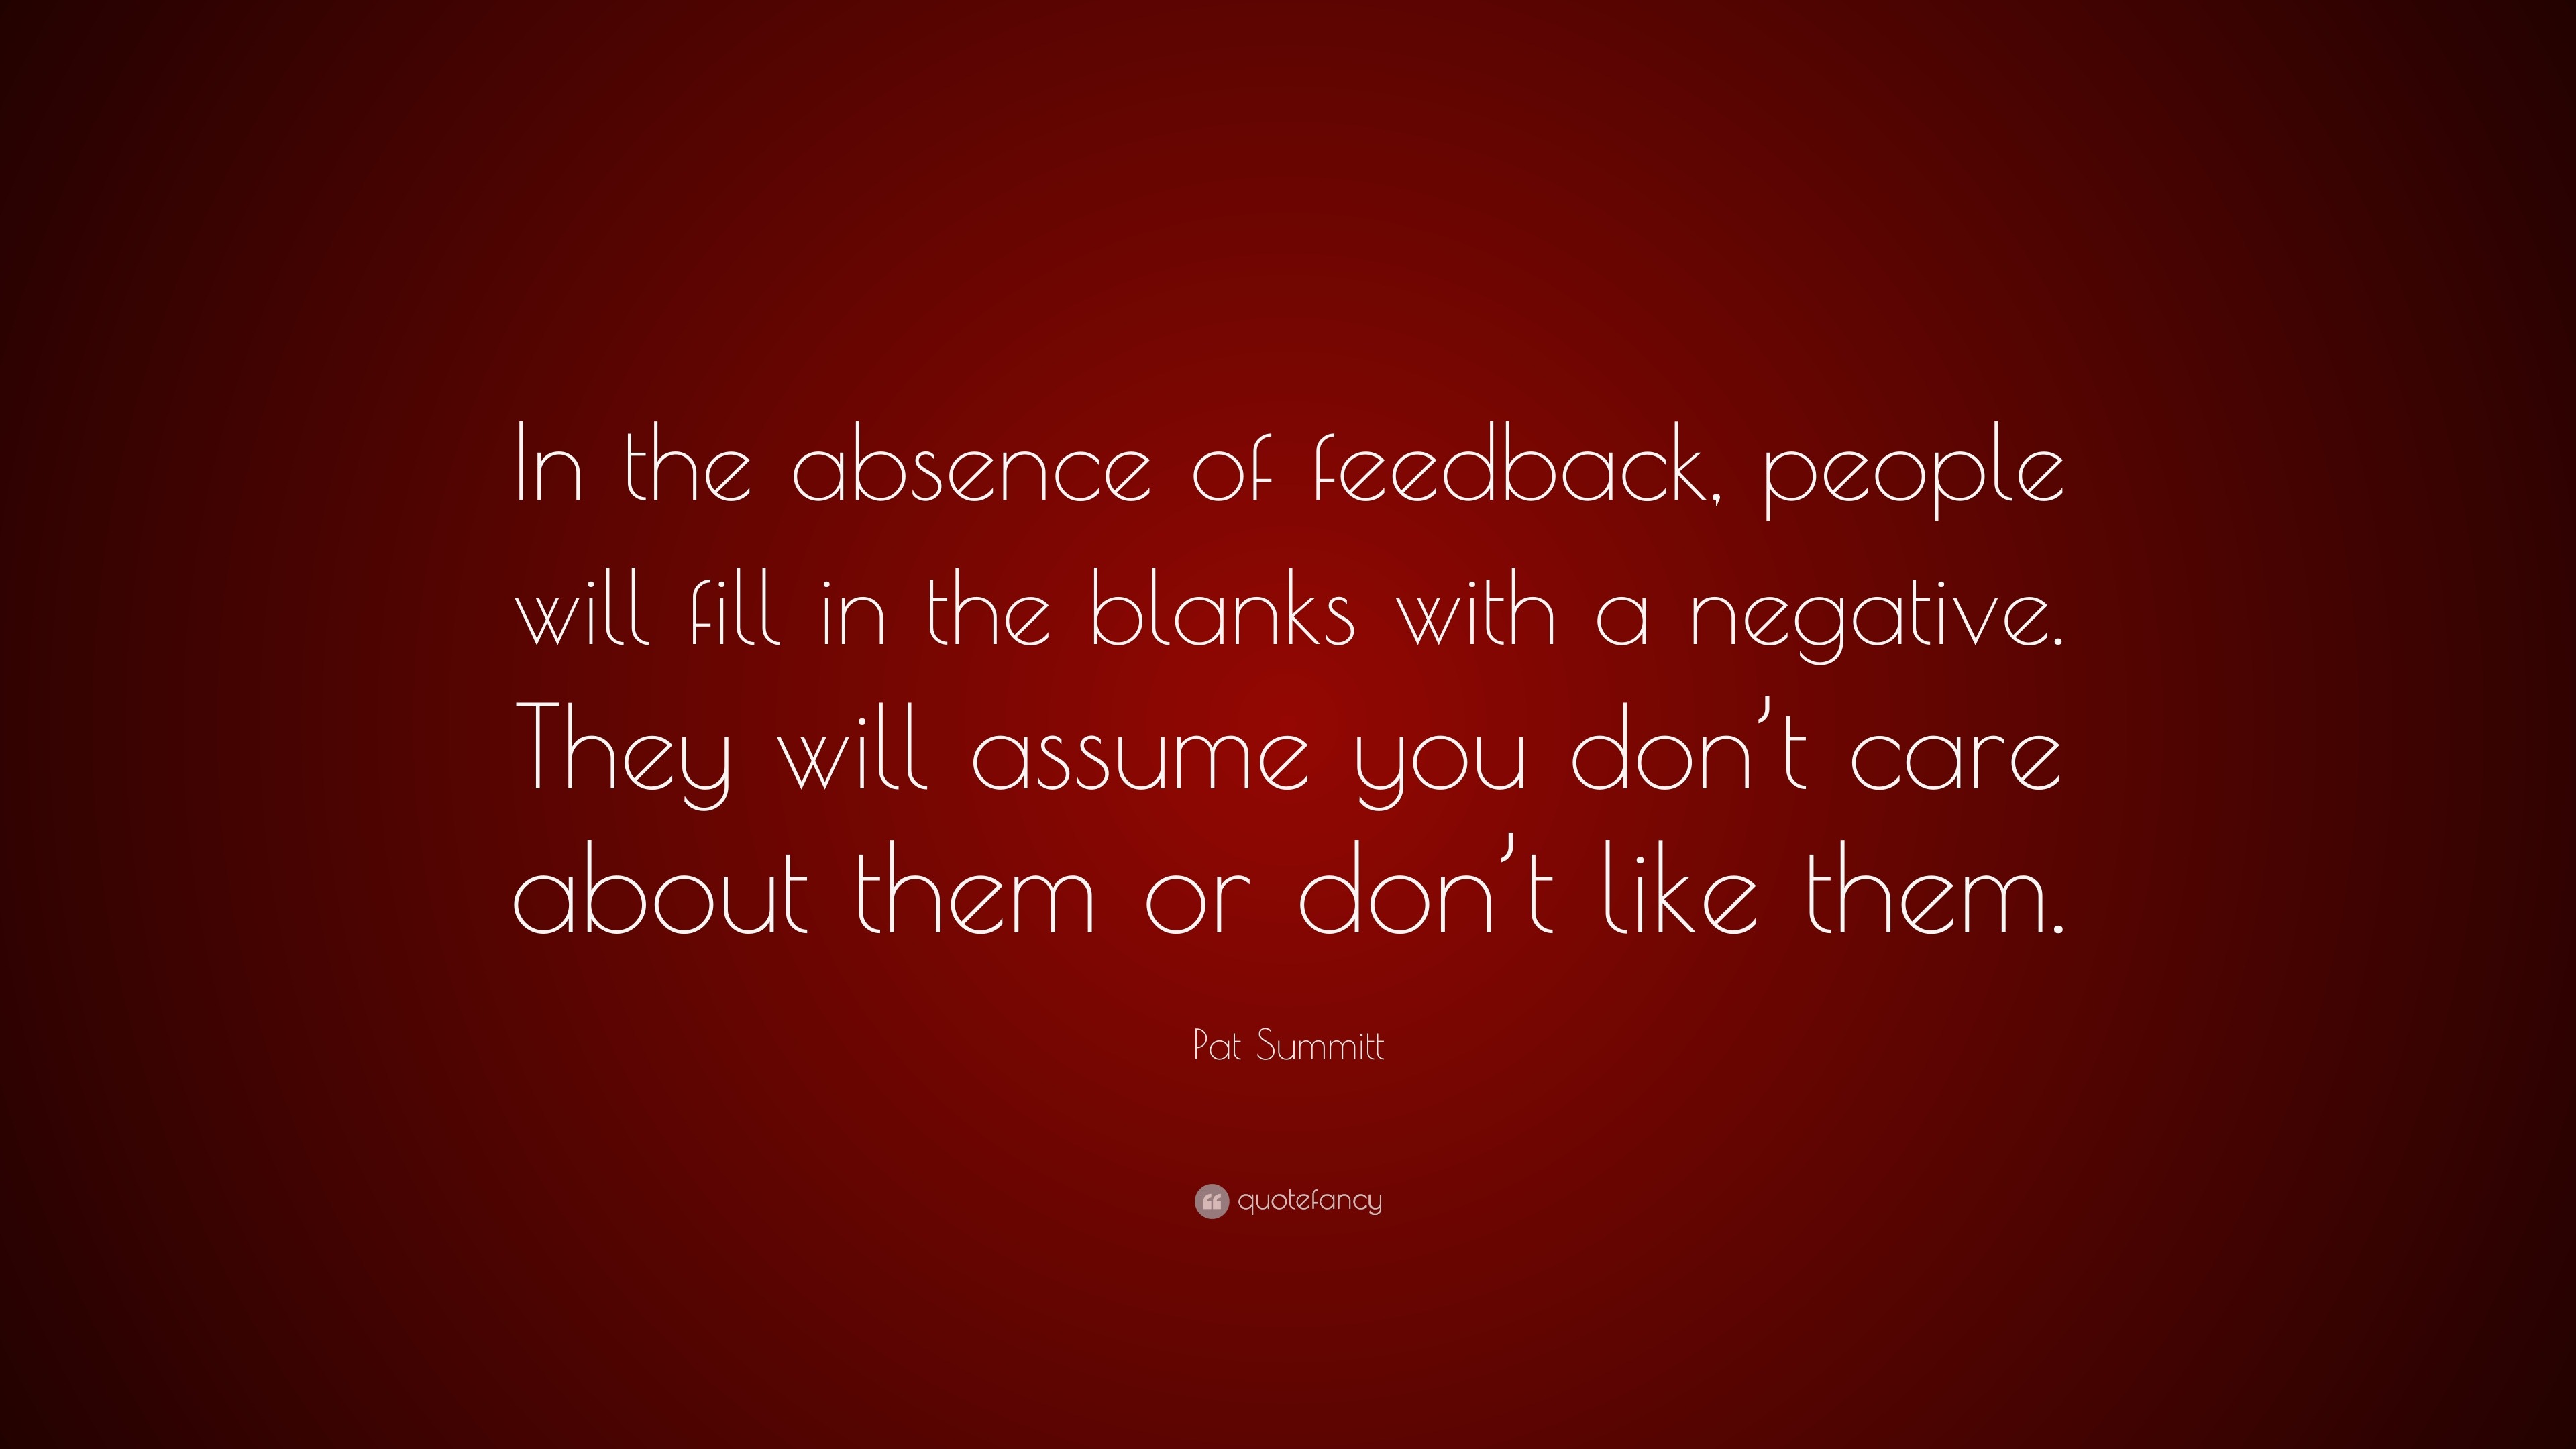 Pat Summitt Quote In The Absence Of Feedback People Will Fill In The Blanks With A Negative They Will Assume You Don T Care About Them O 7 Wallpapers Quotefancy